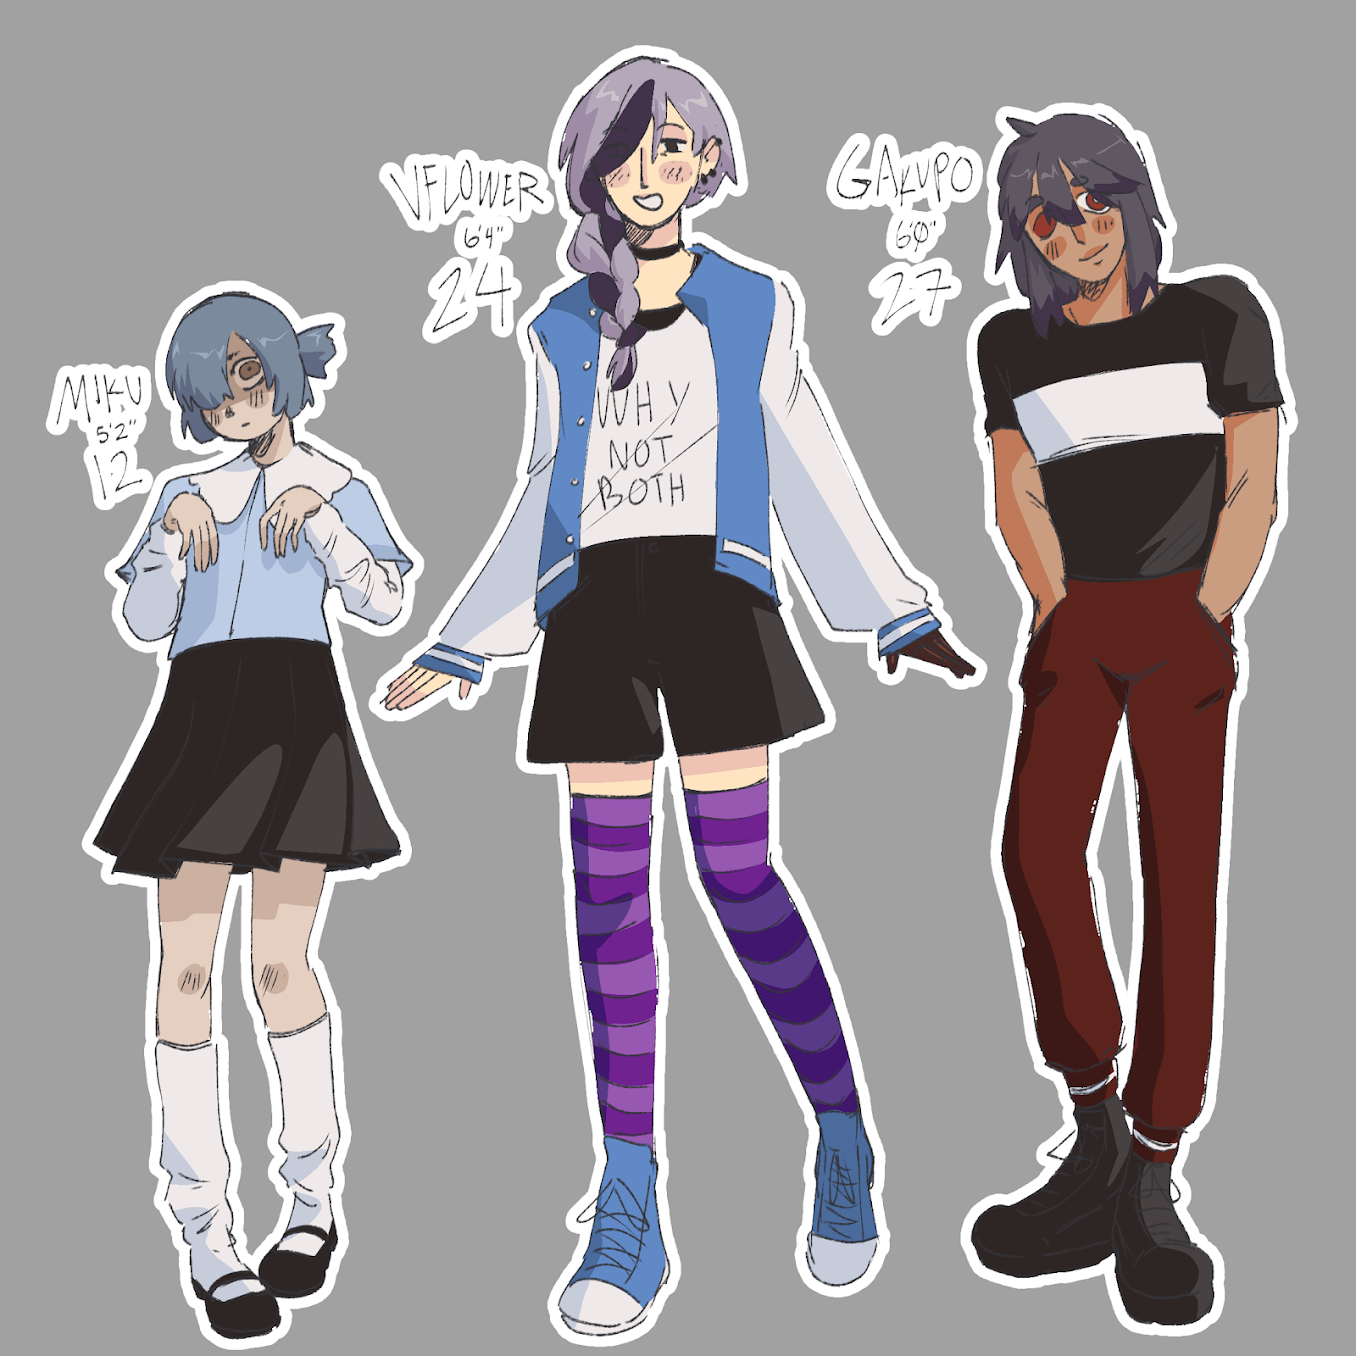 digital drawing of three characters. miku, who is 12, vflower who is 24, and gakupo who is 27